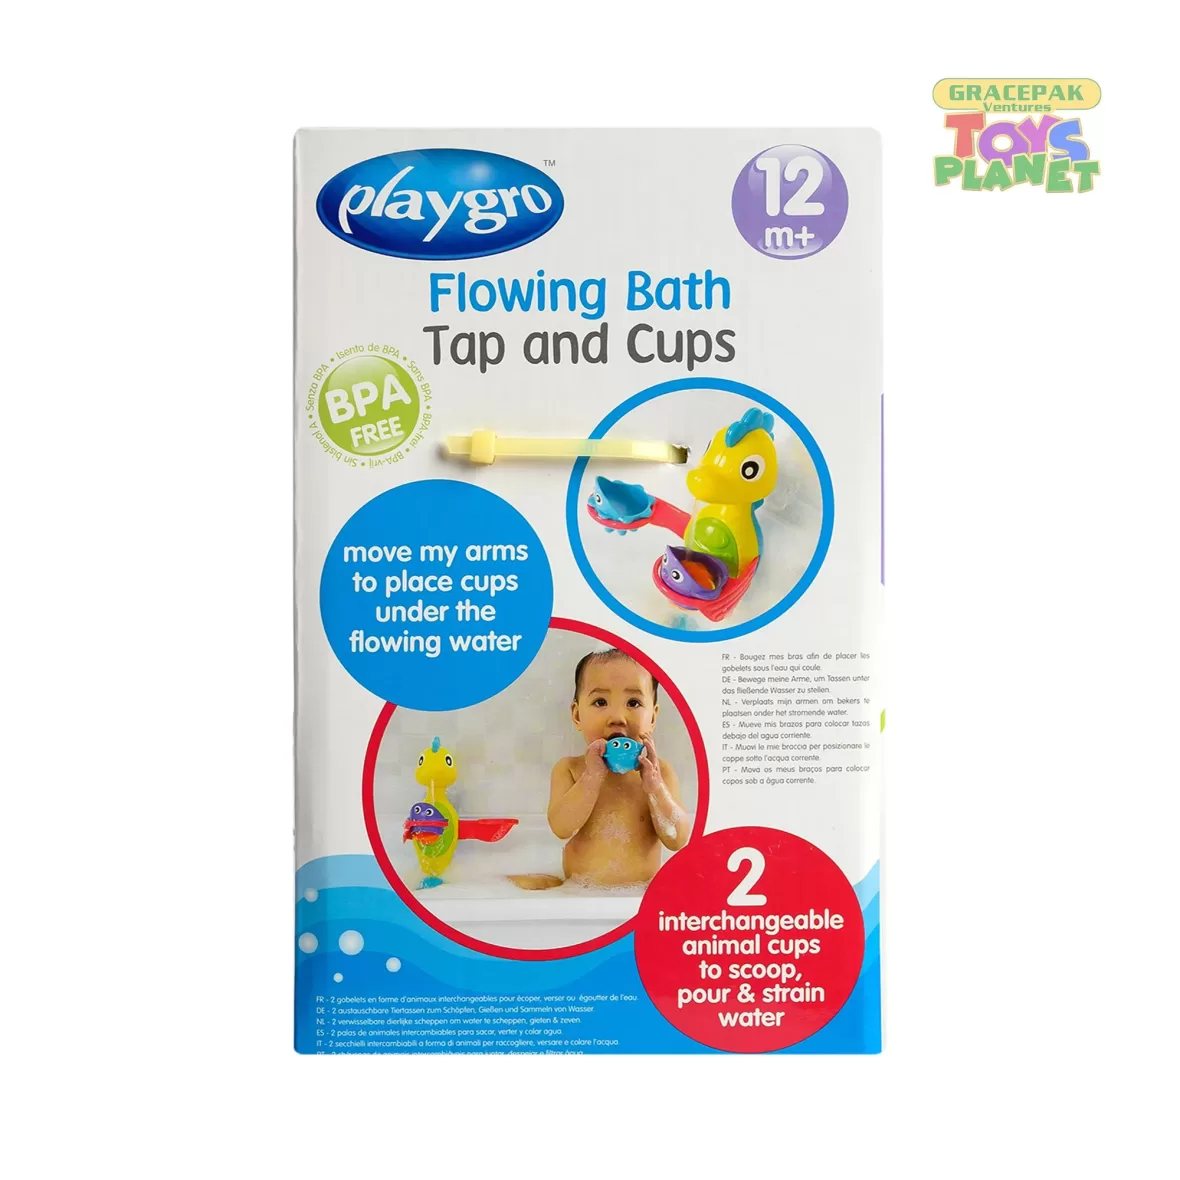 Playgro_Flowing Bath Tap and Cups_3